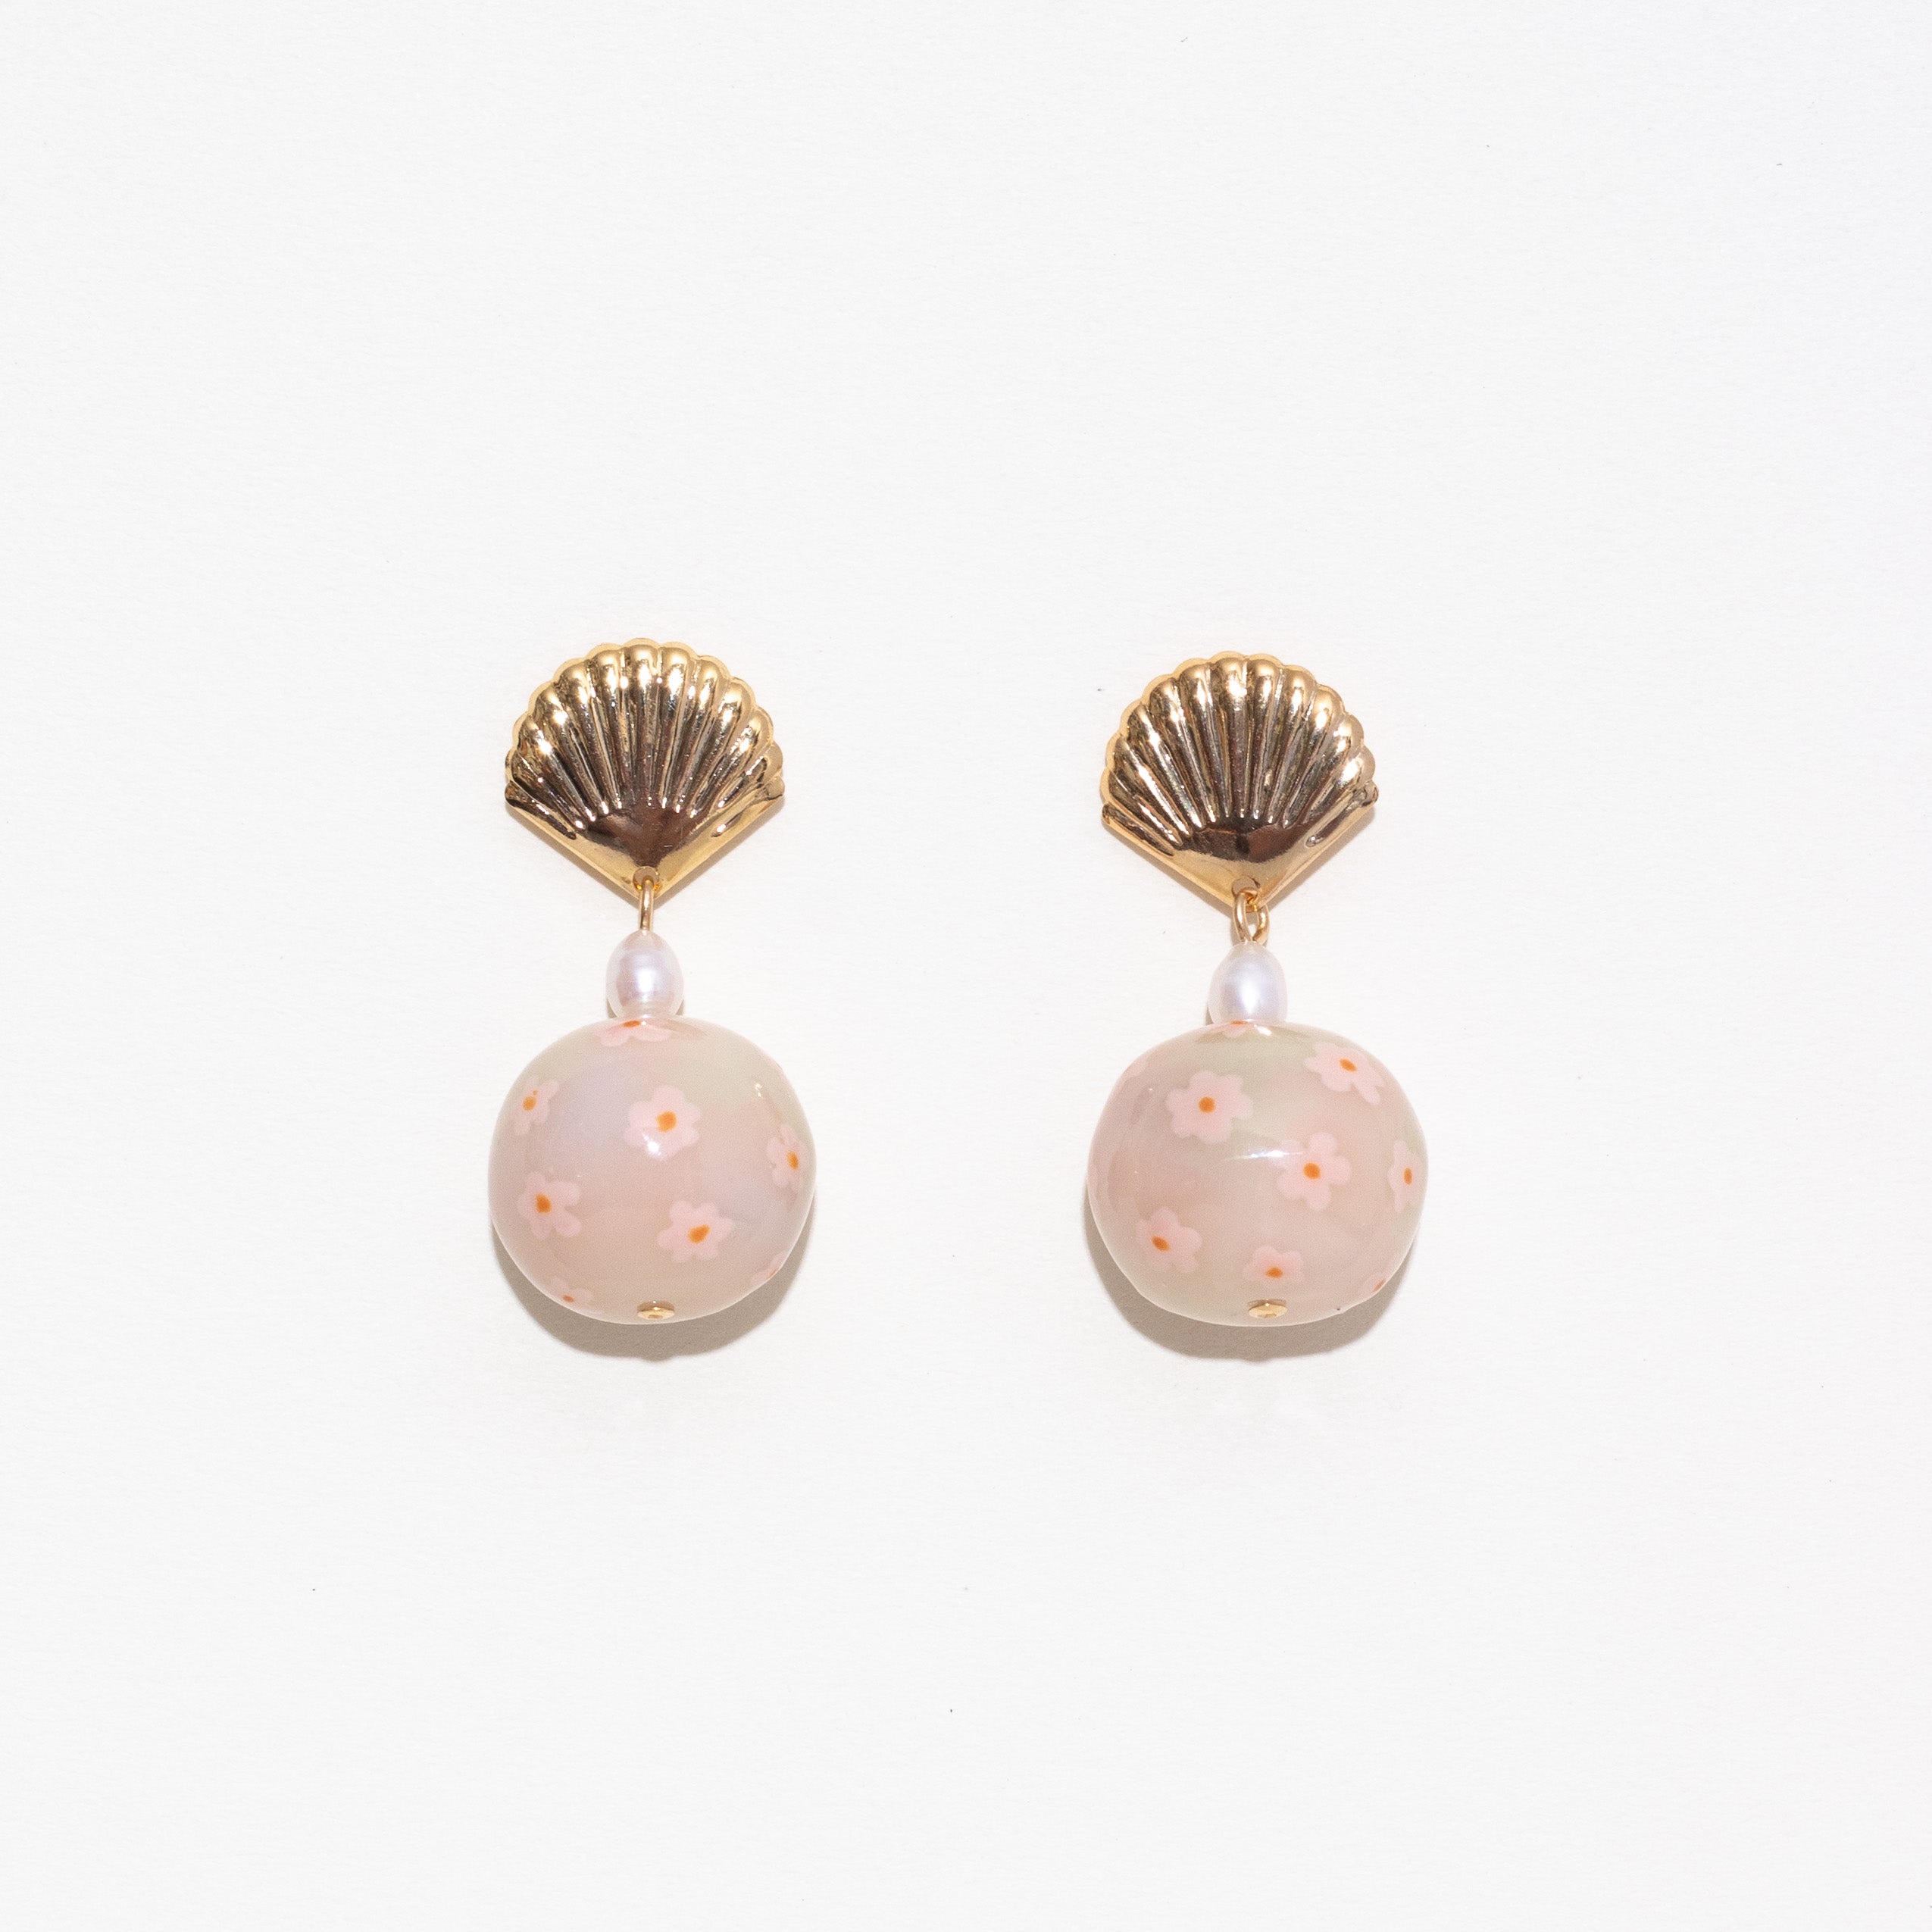 The Bauble Earrings in Ditsy Floral